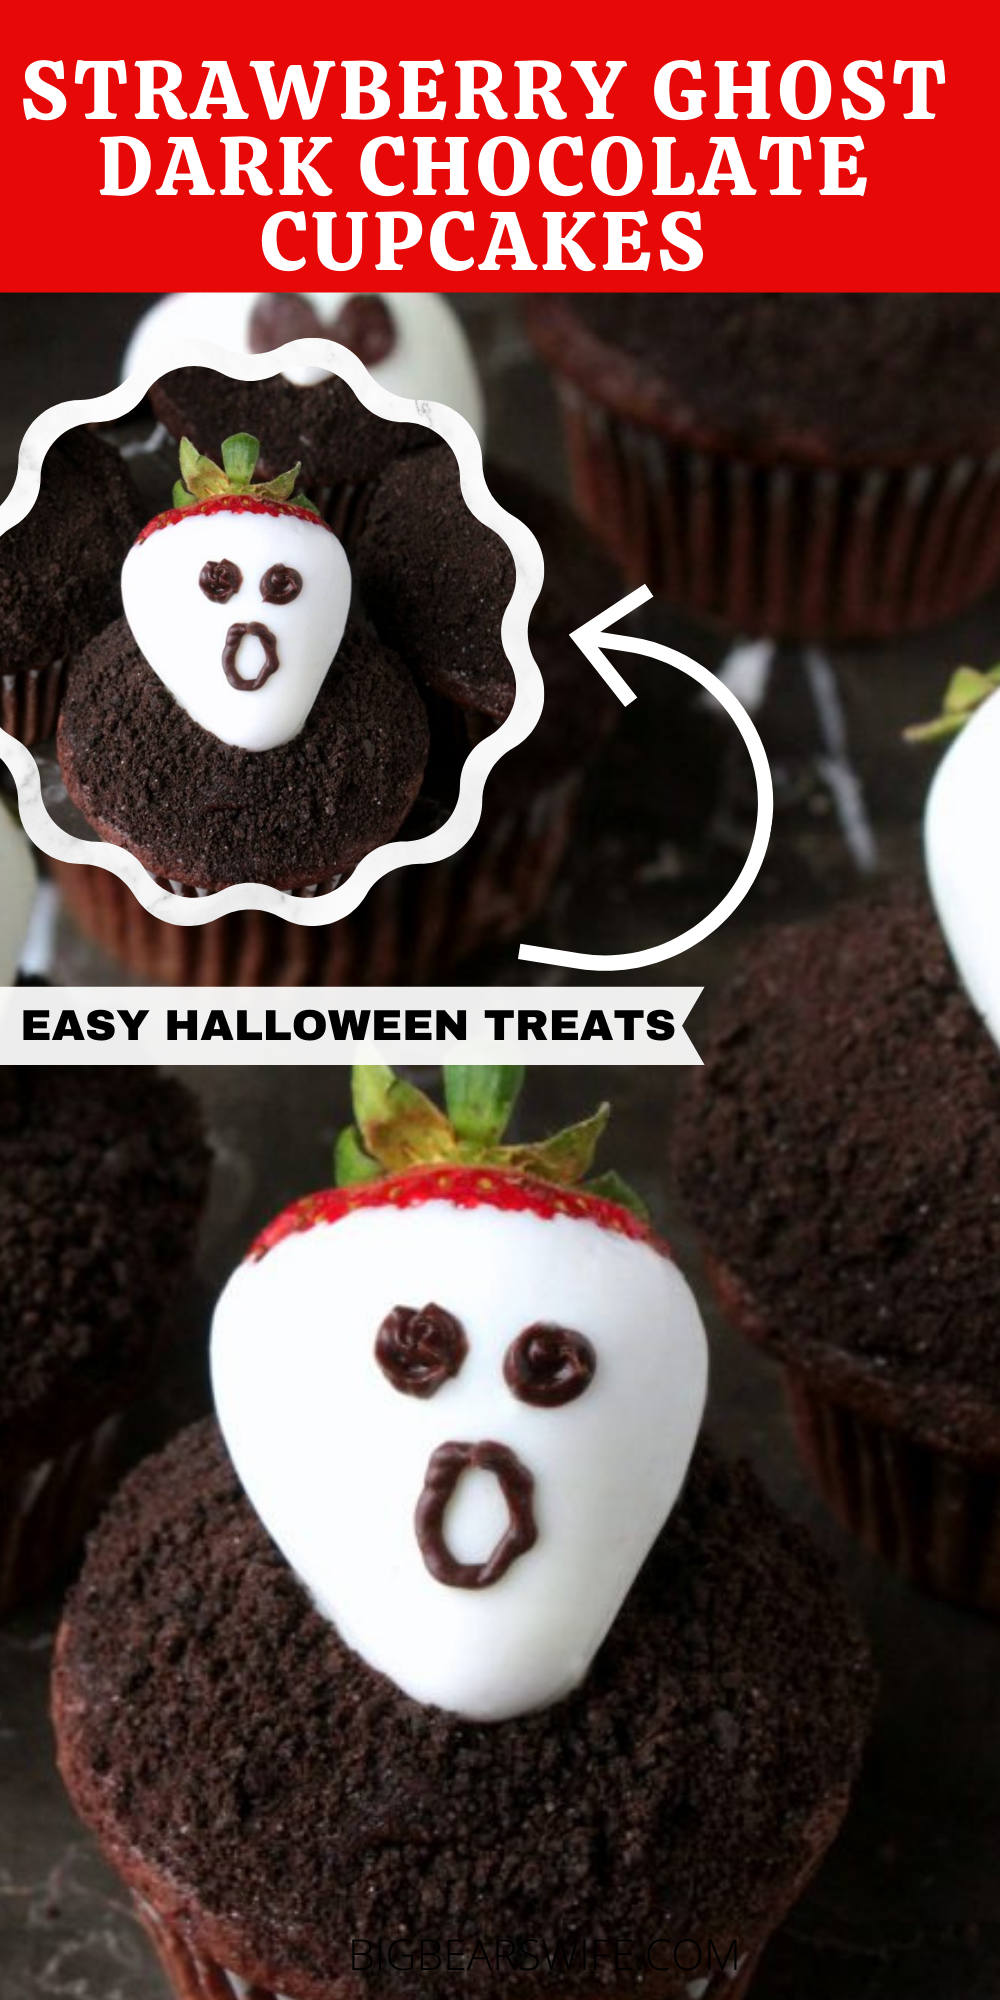 Don’t get spooked! These Strawberry Ghost Dark Chocolate Cupcakes are nothing be scared about! They’re a sweet and easy dessert that’s perfect for Halloween! via @bigbearswife